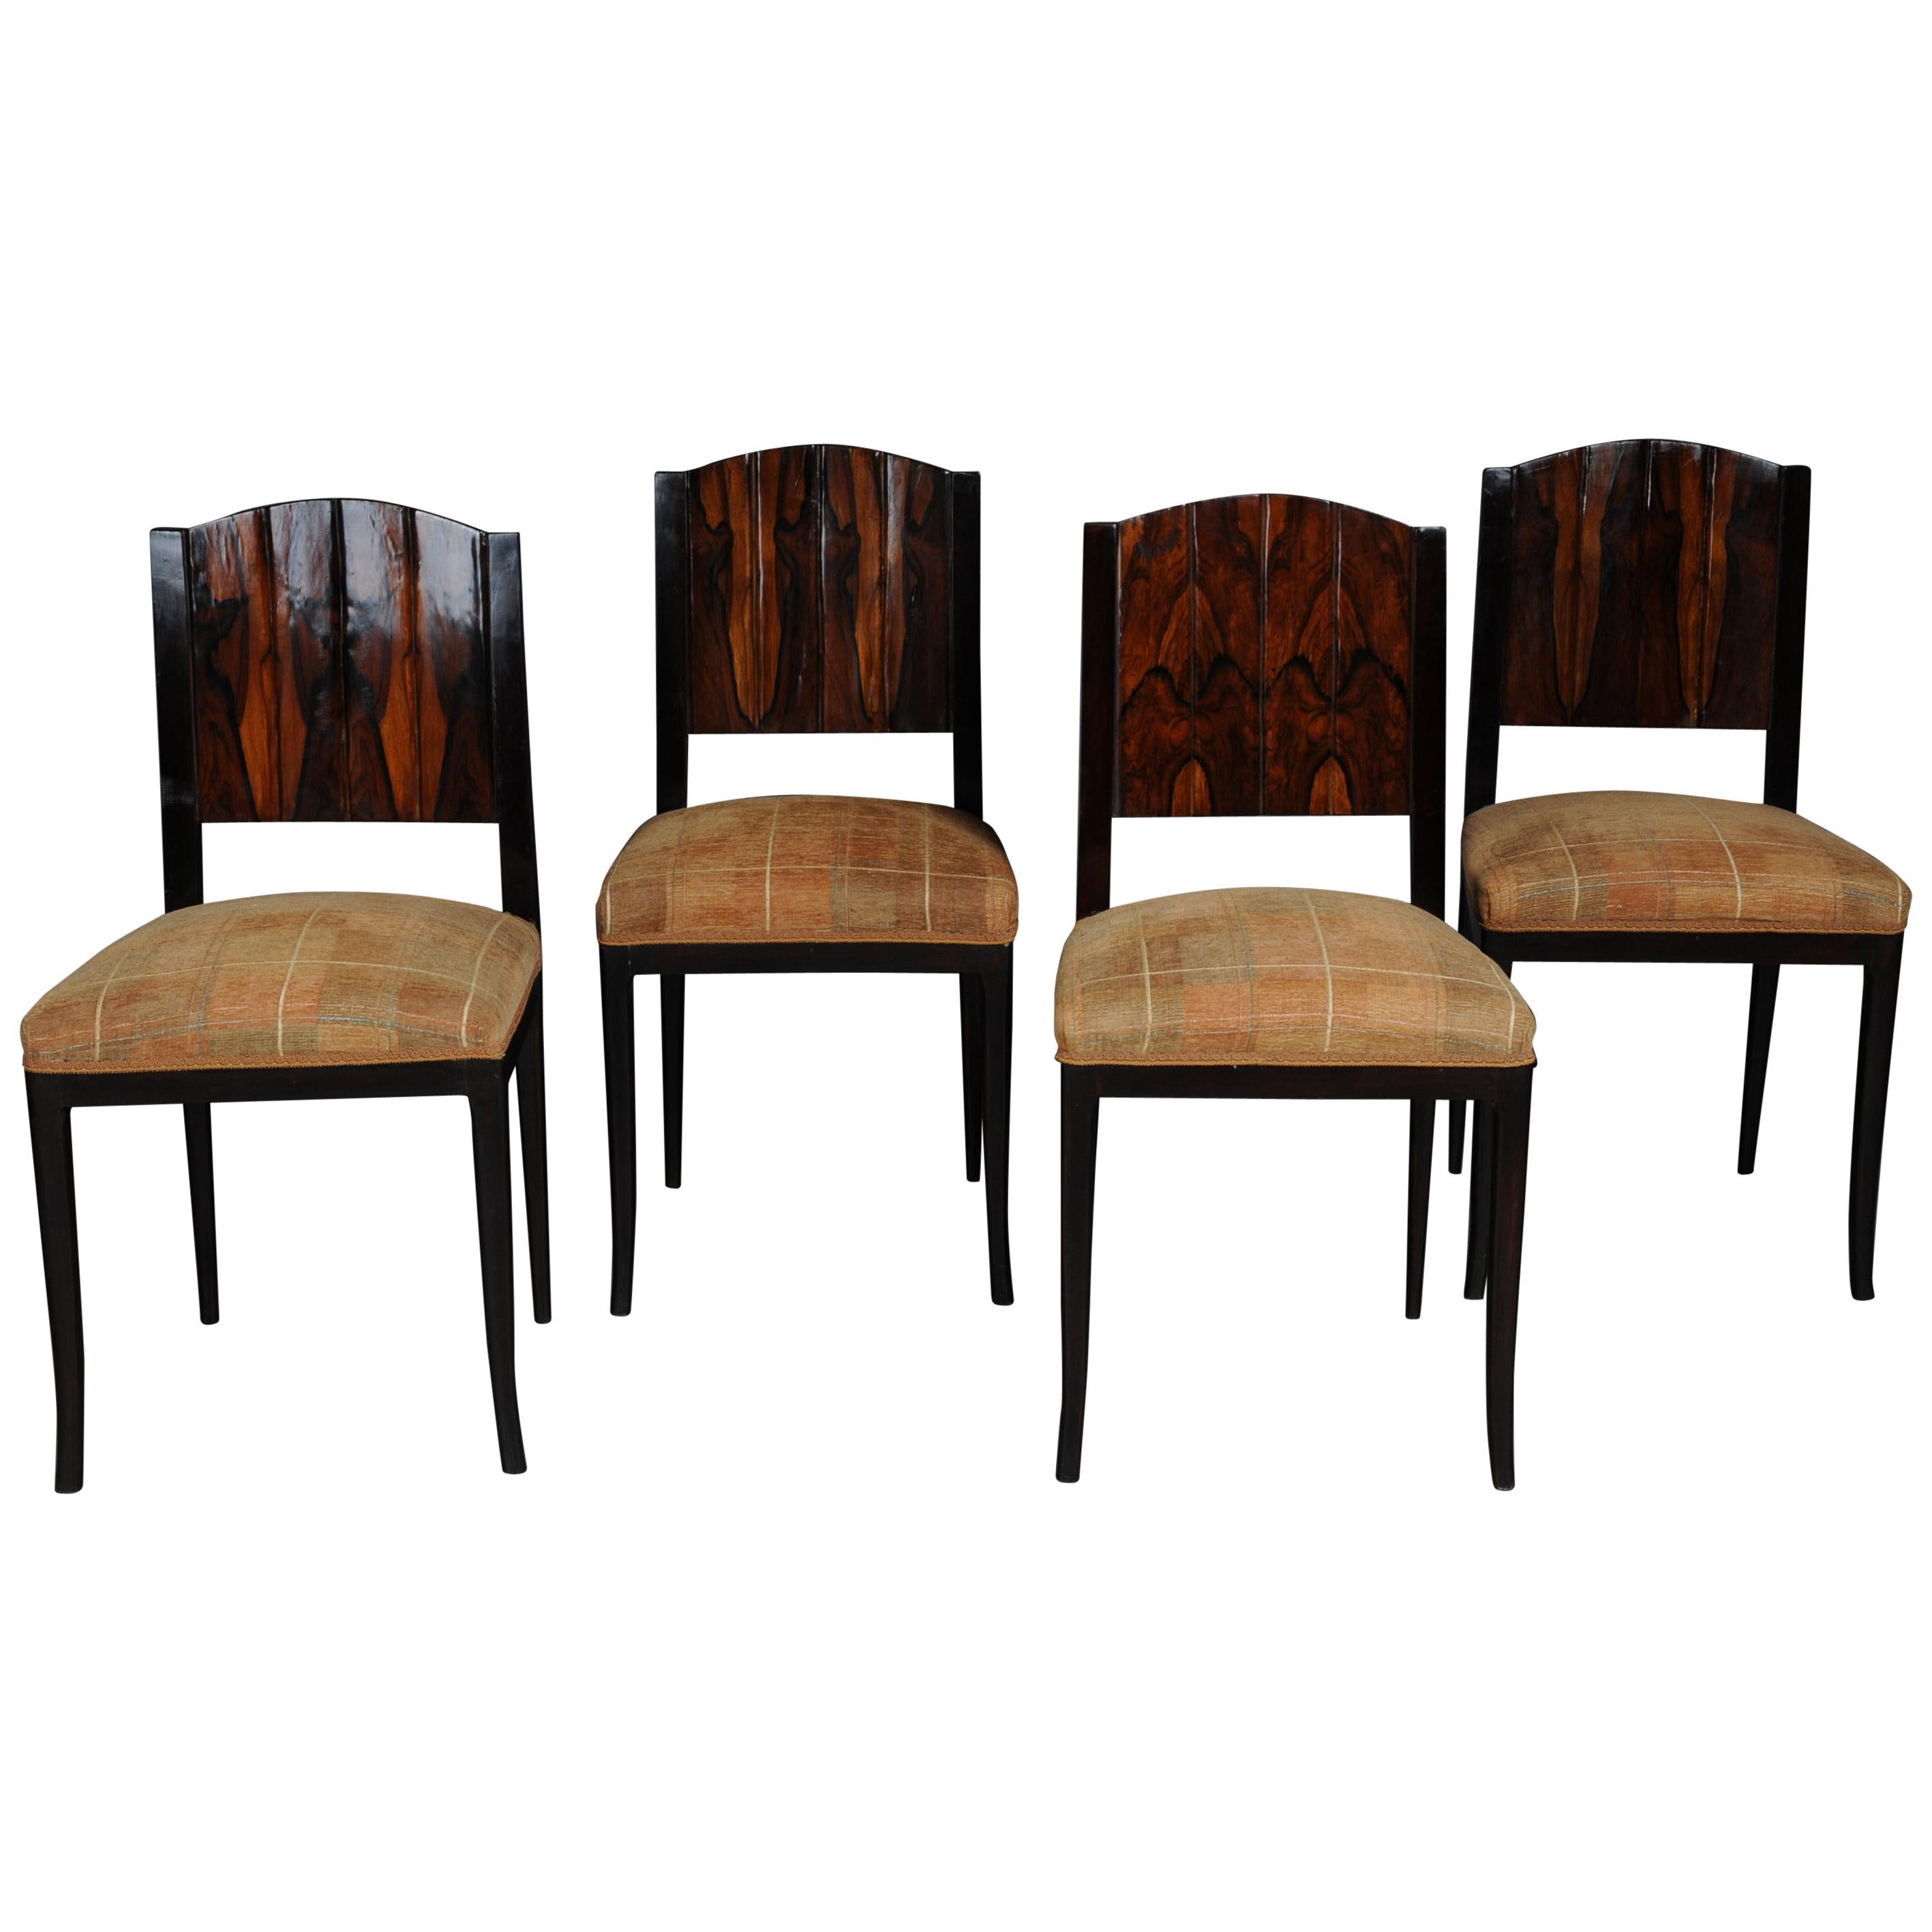 20th Century Classic Set of 4 Chairs in Art Deco Style